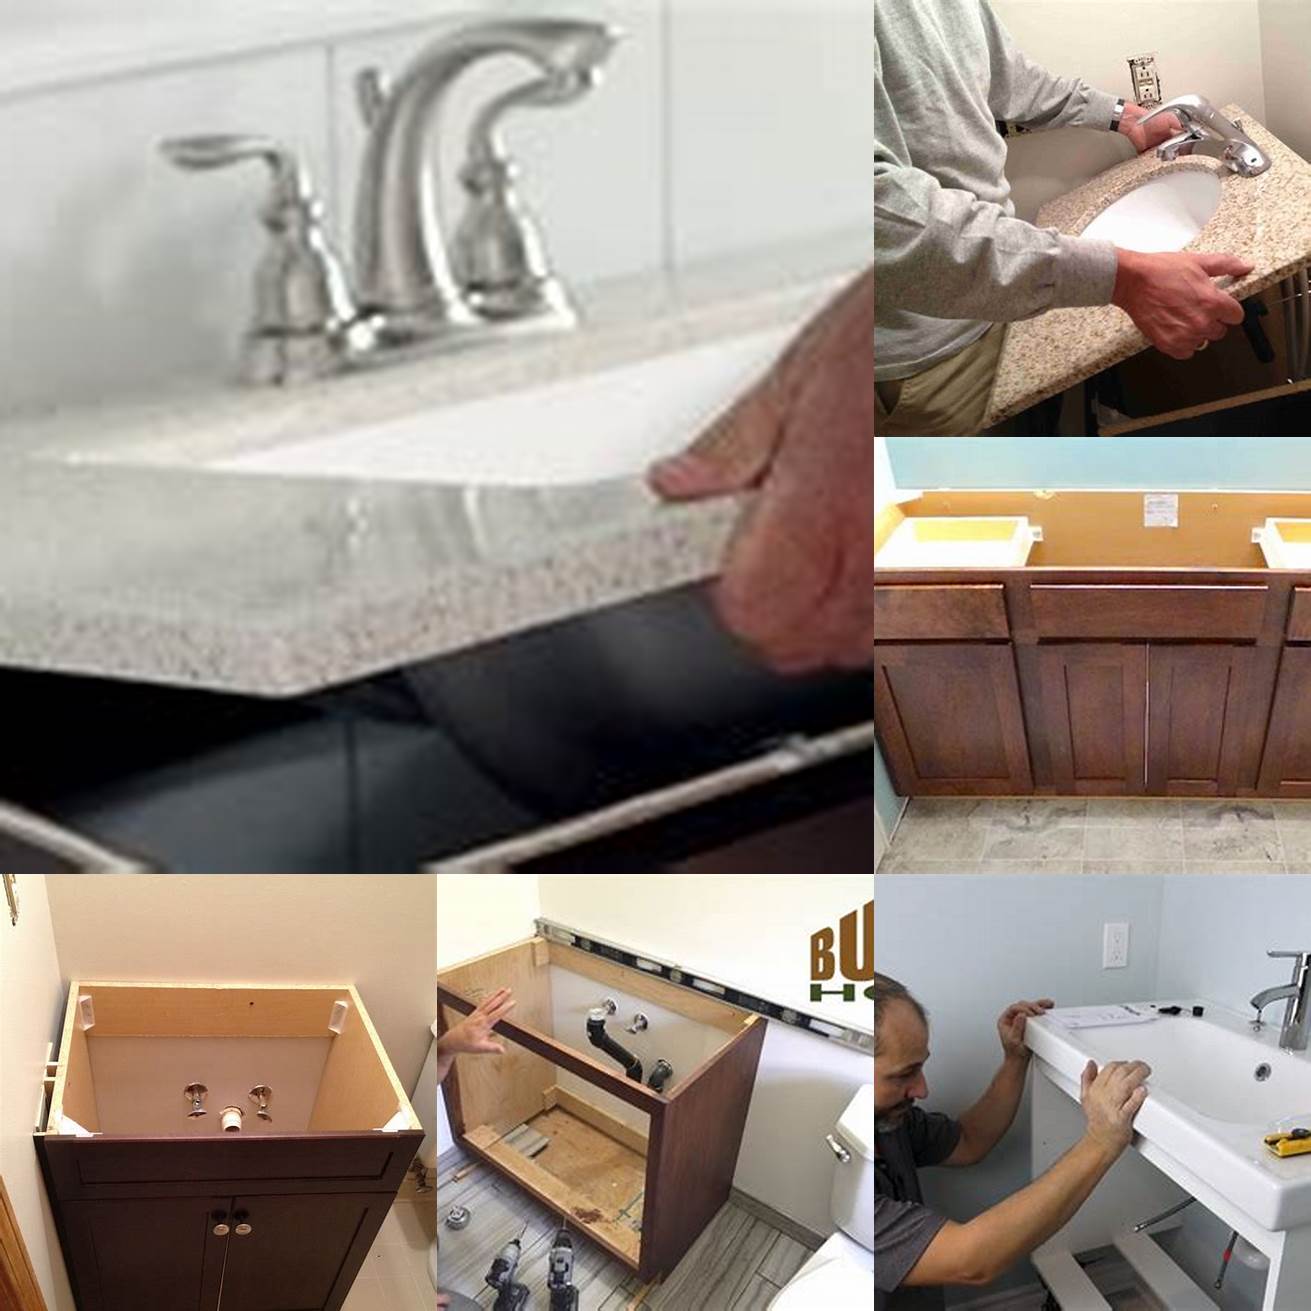 Install the new vanity Follow the manufacturers instructions carefully when installing the new vanity